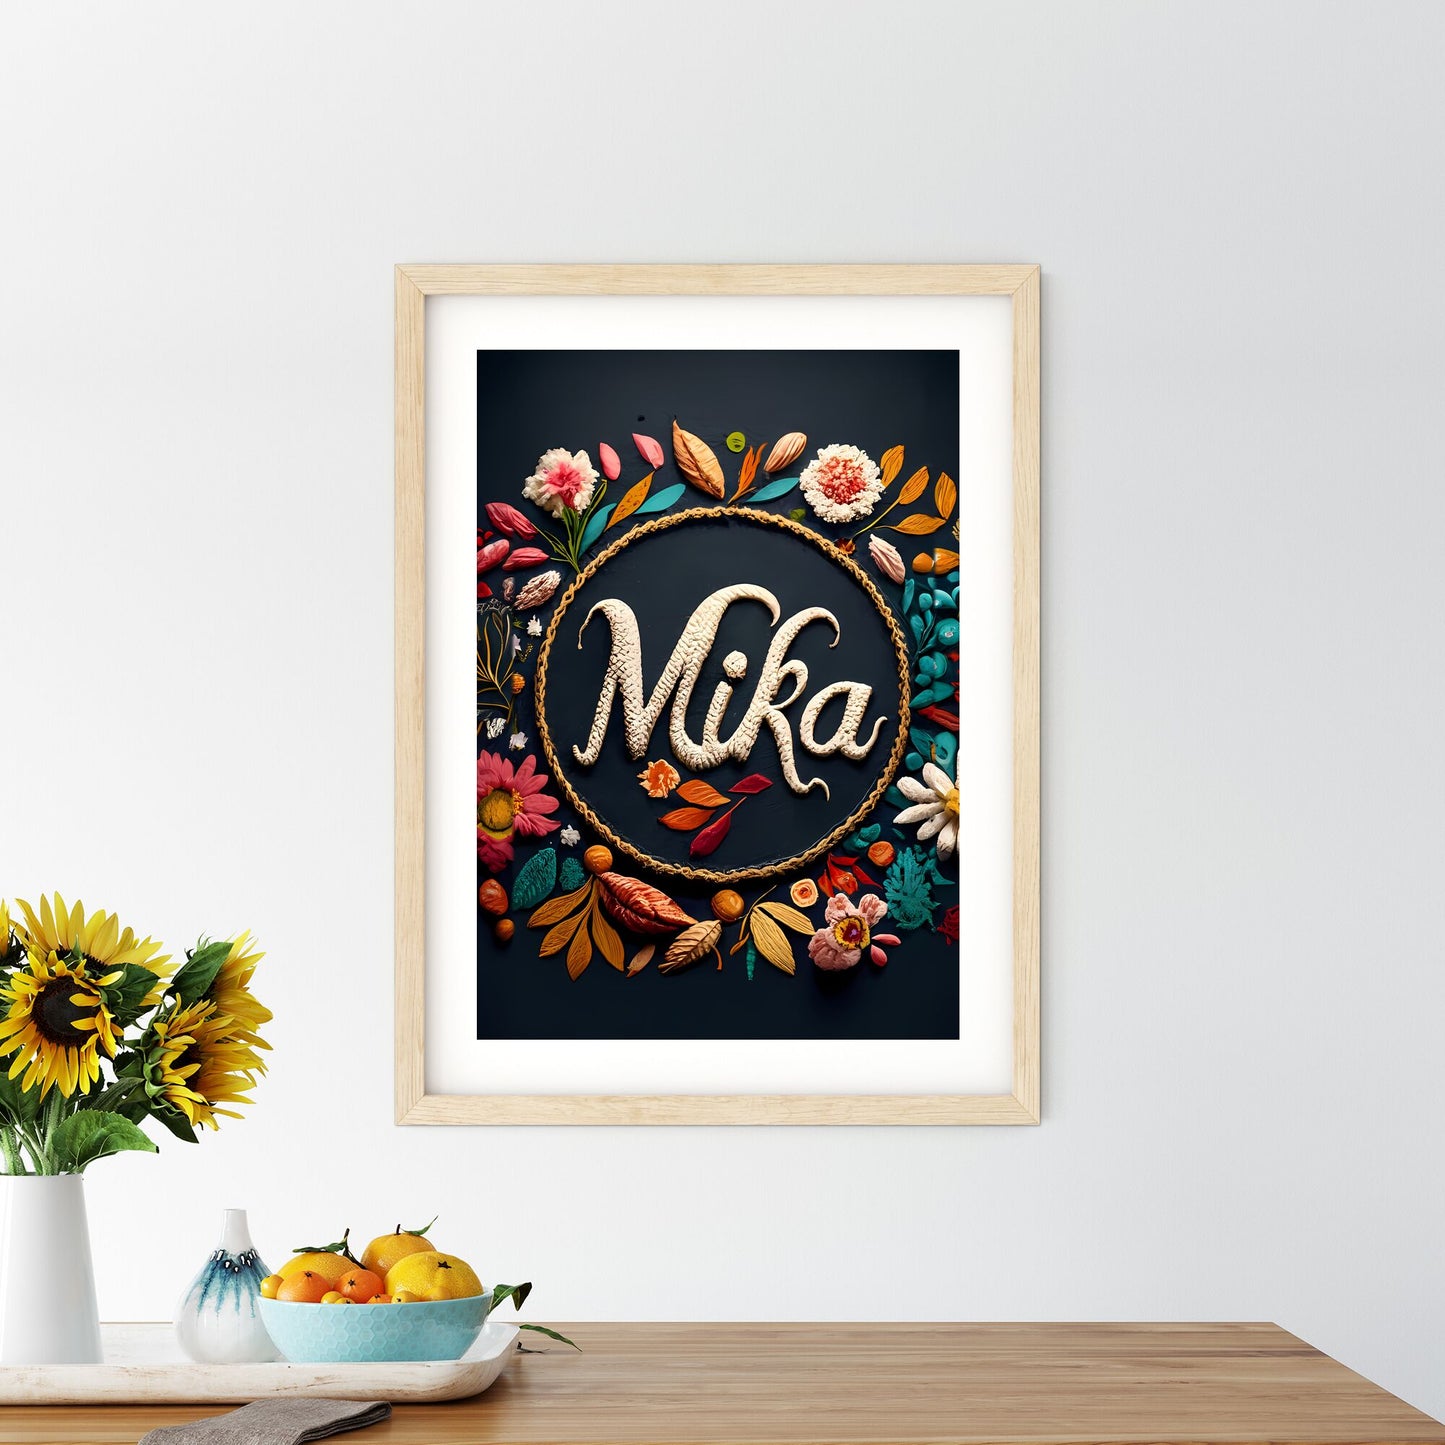 Mika - A Circular Frame Made Of Flowers And Leaves Art Print Default Title